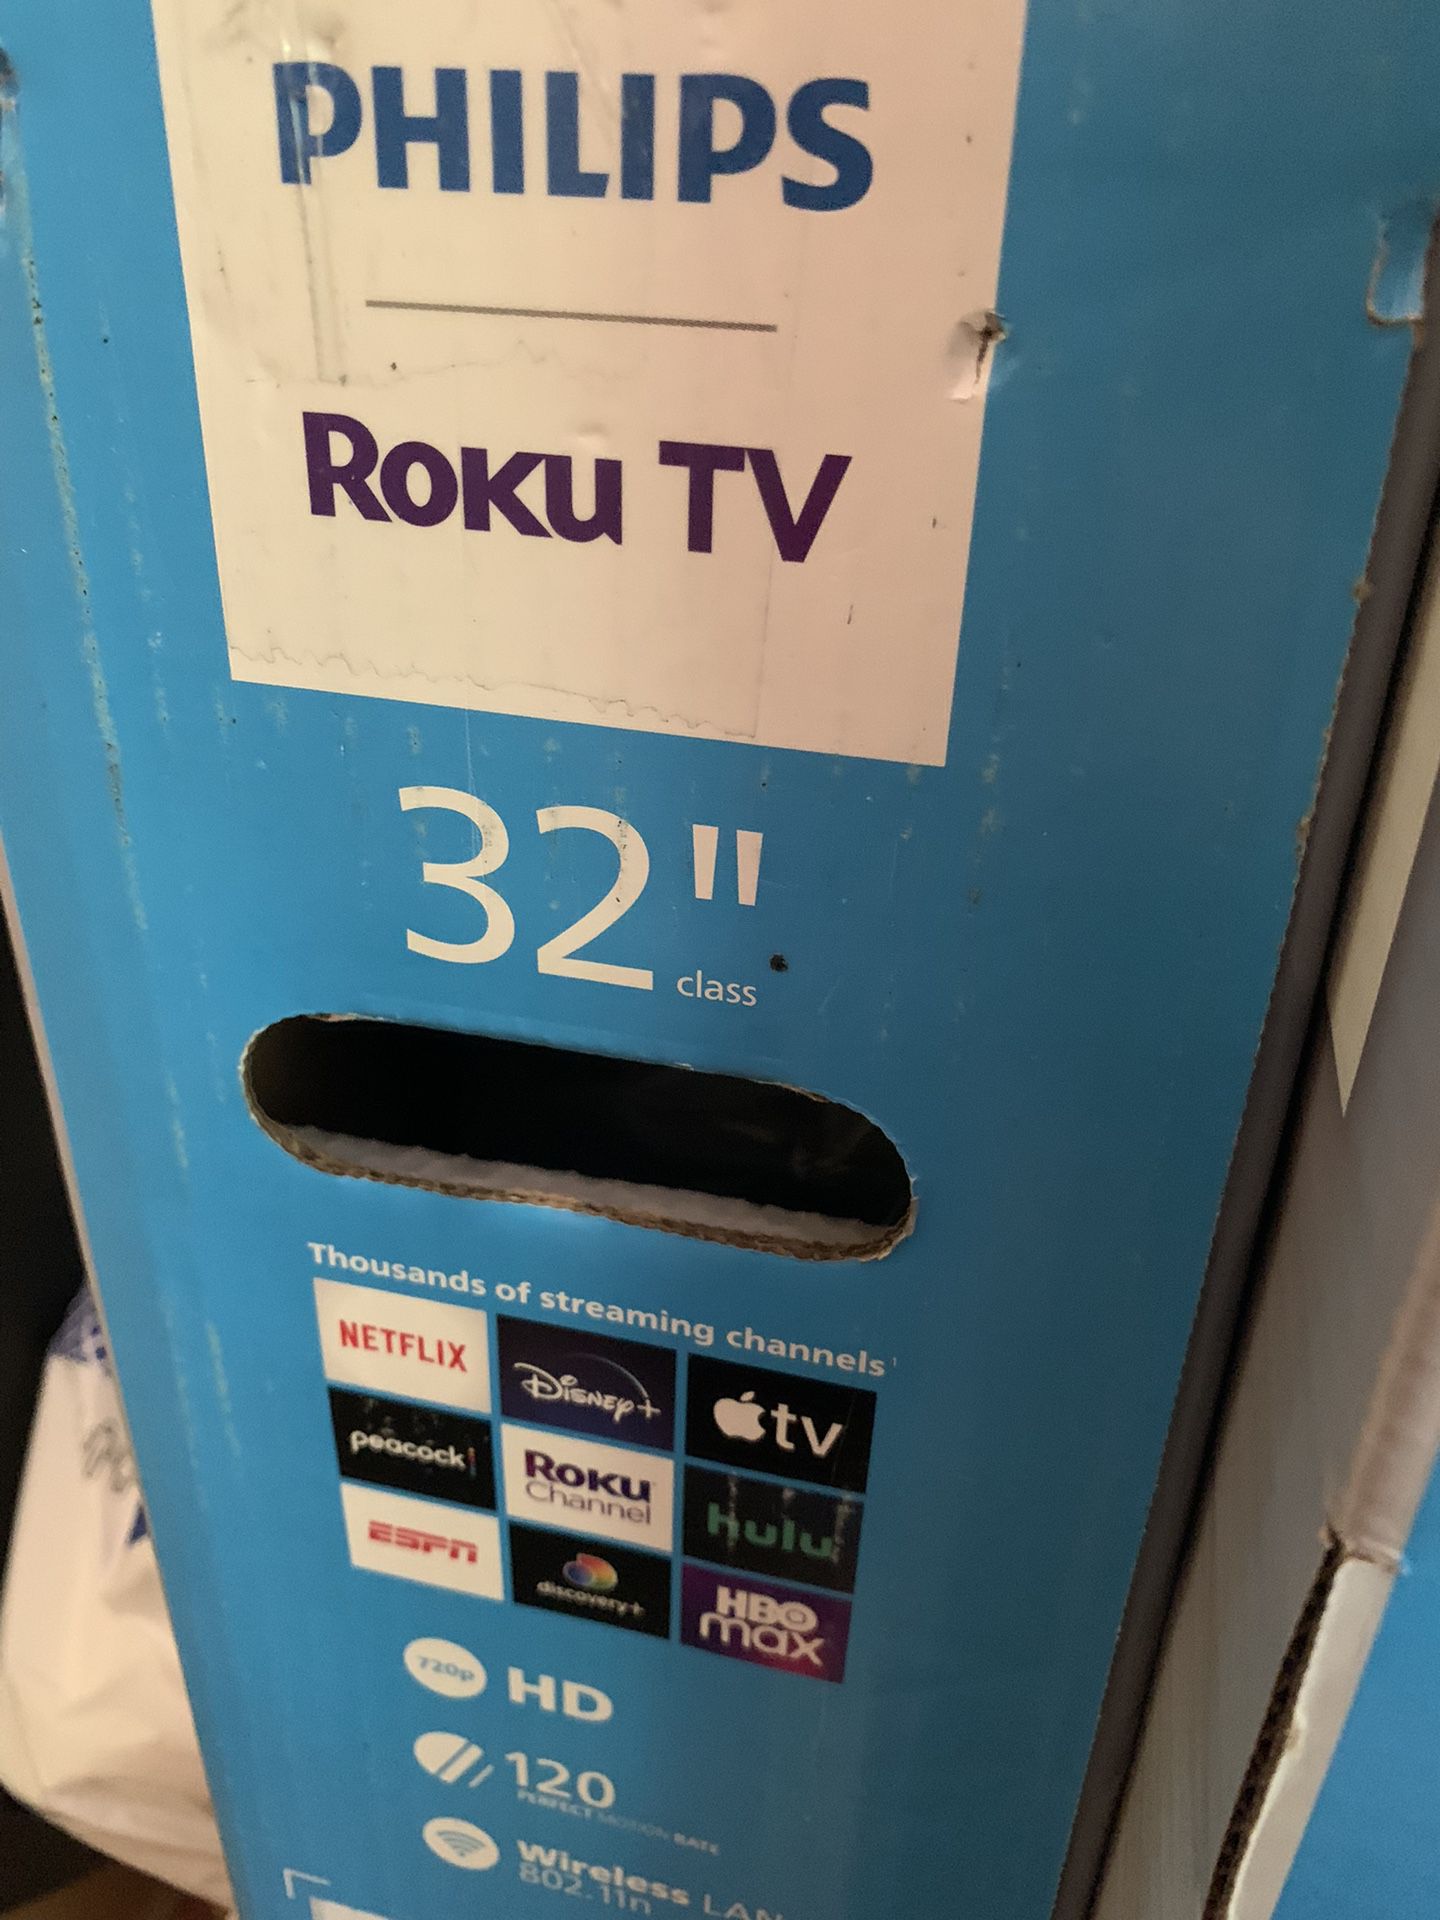 Philips Roku 32” Television 